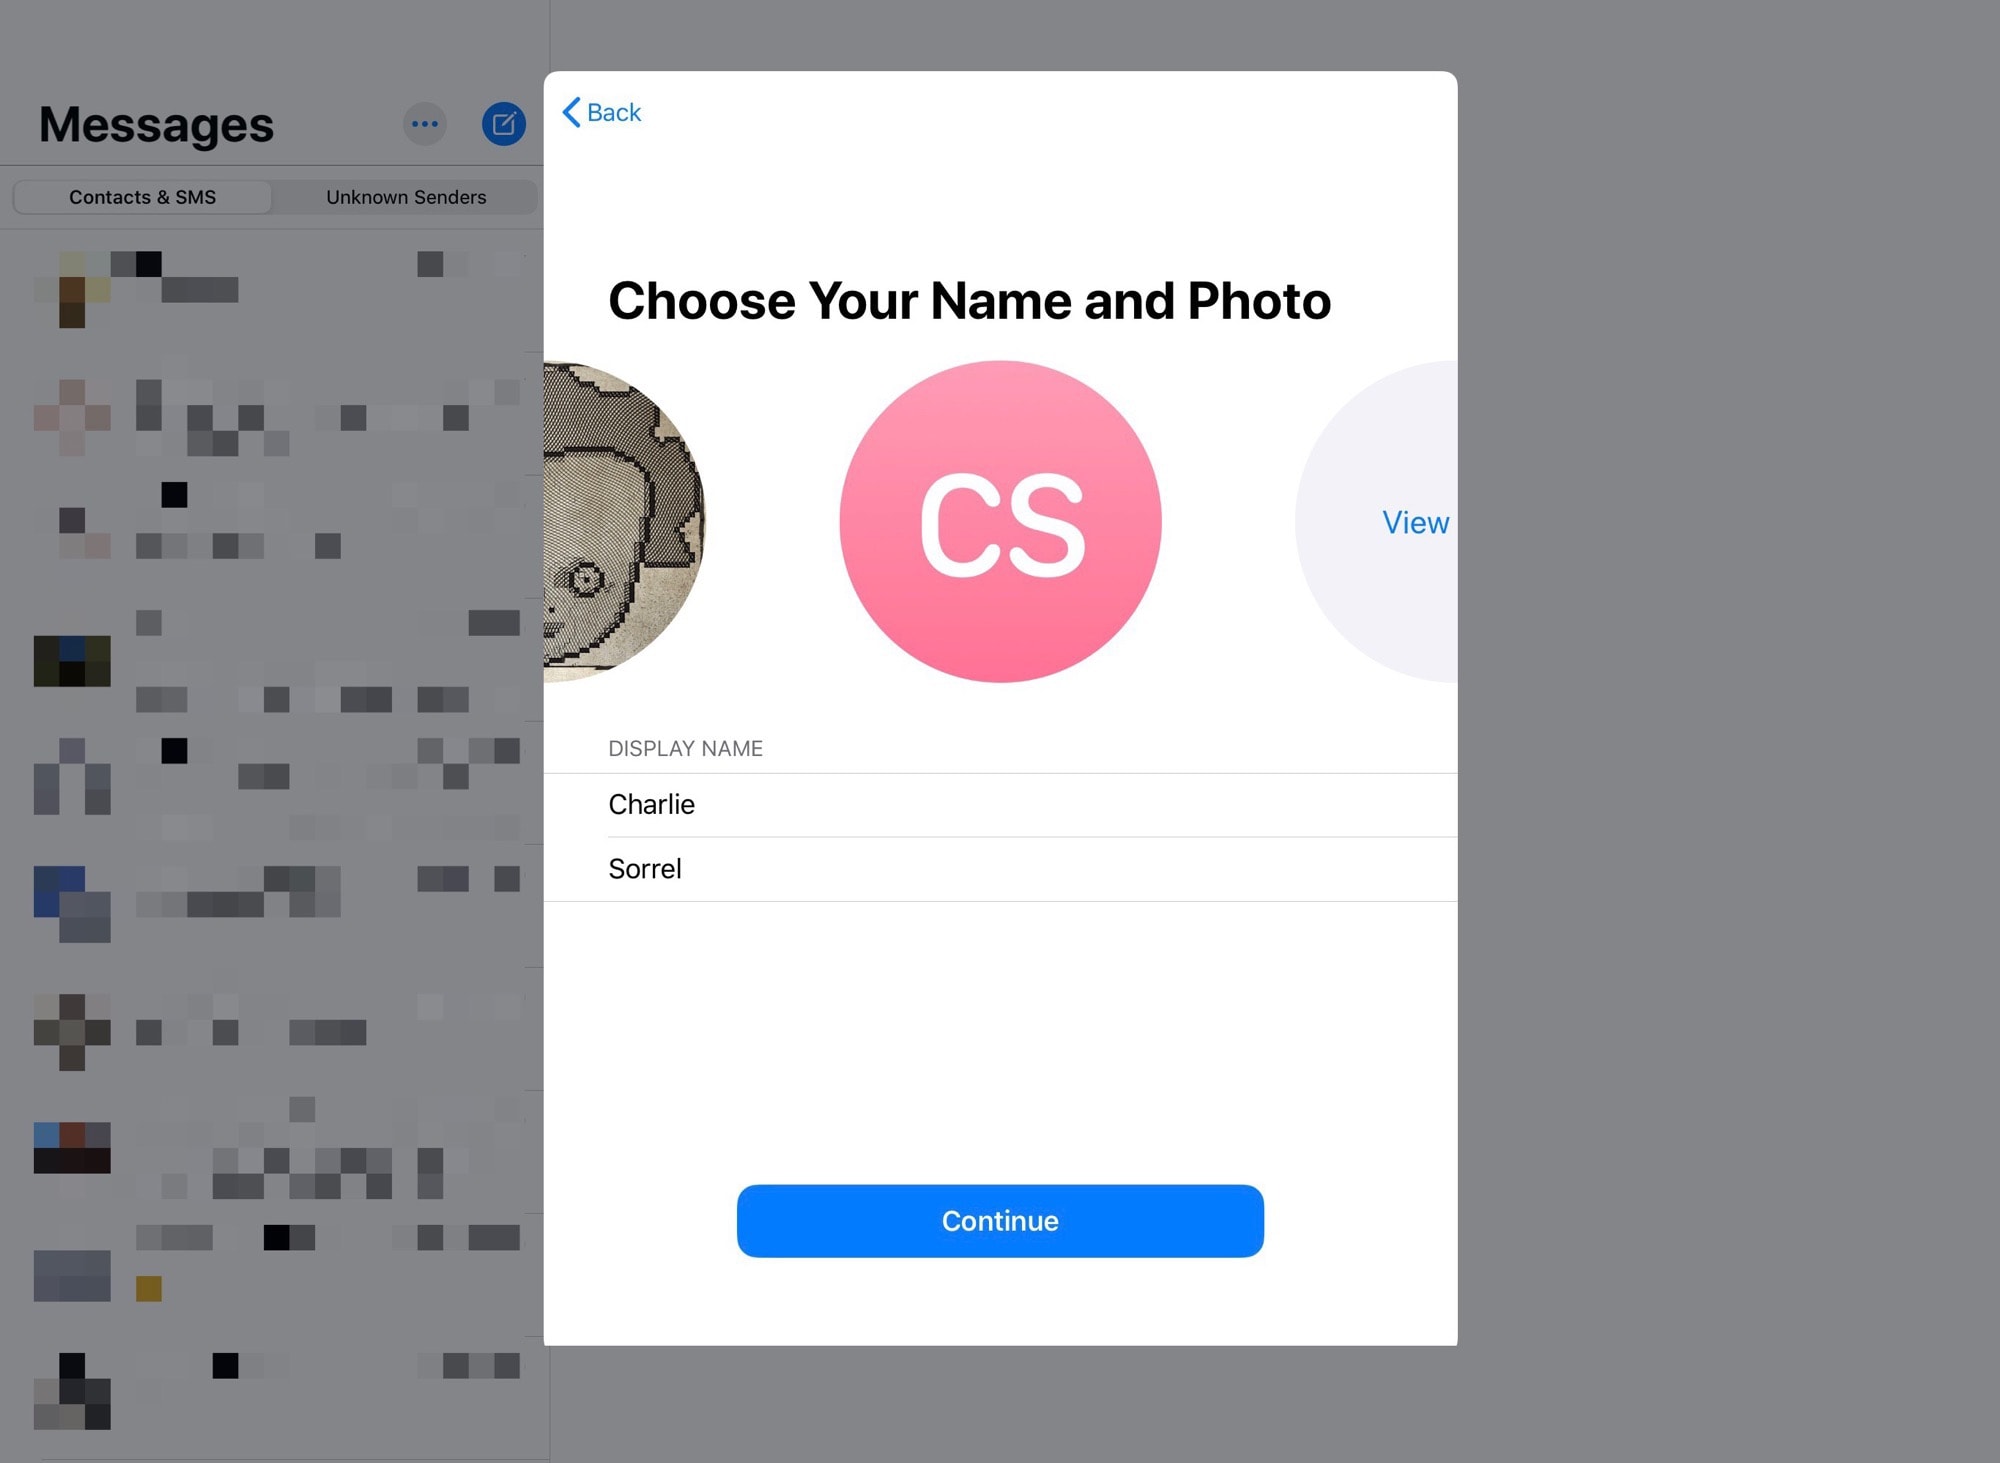   To add a custom photo to iMessages, first choose the image and add its name. 